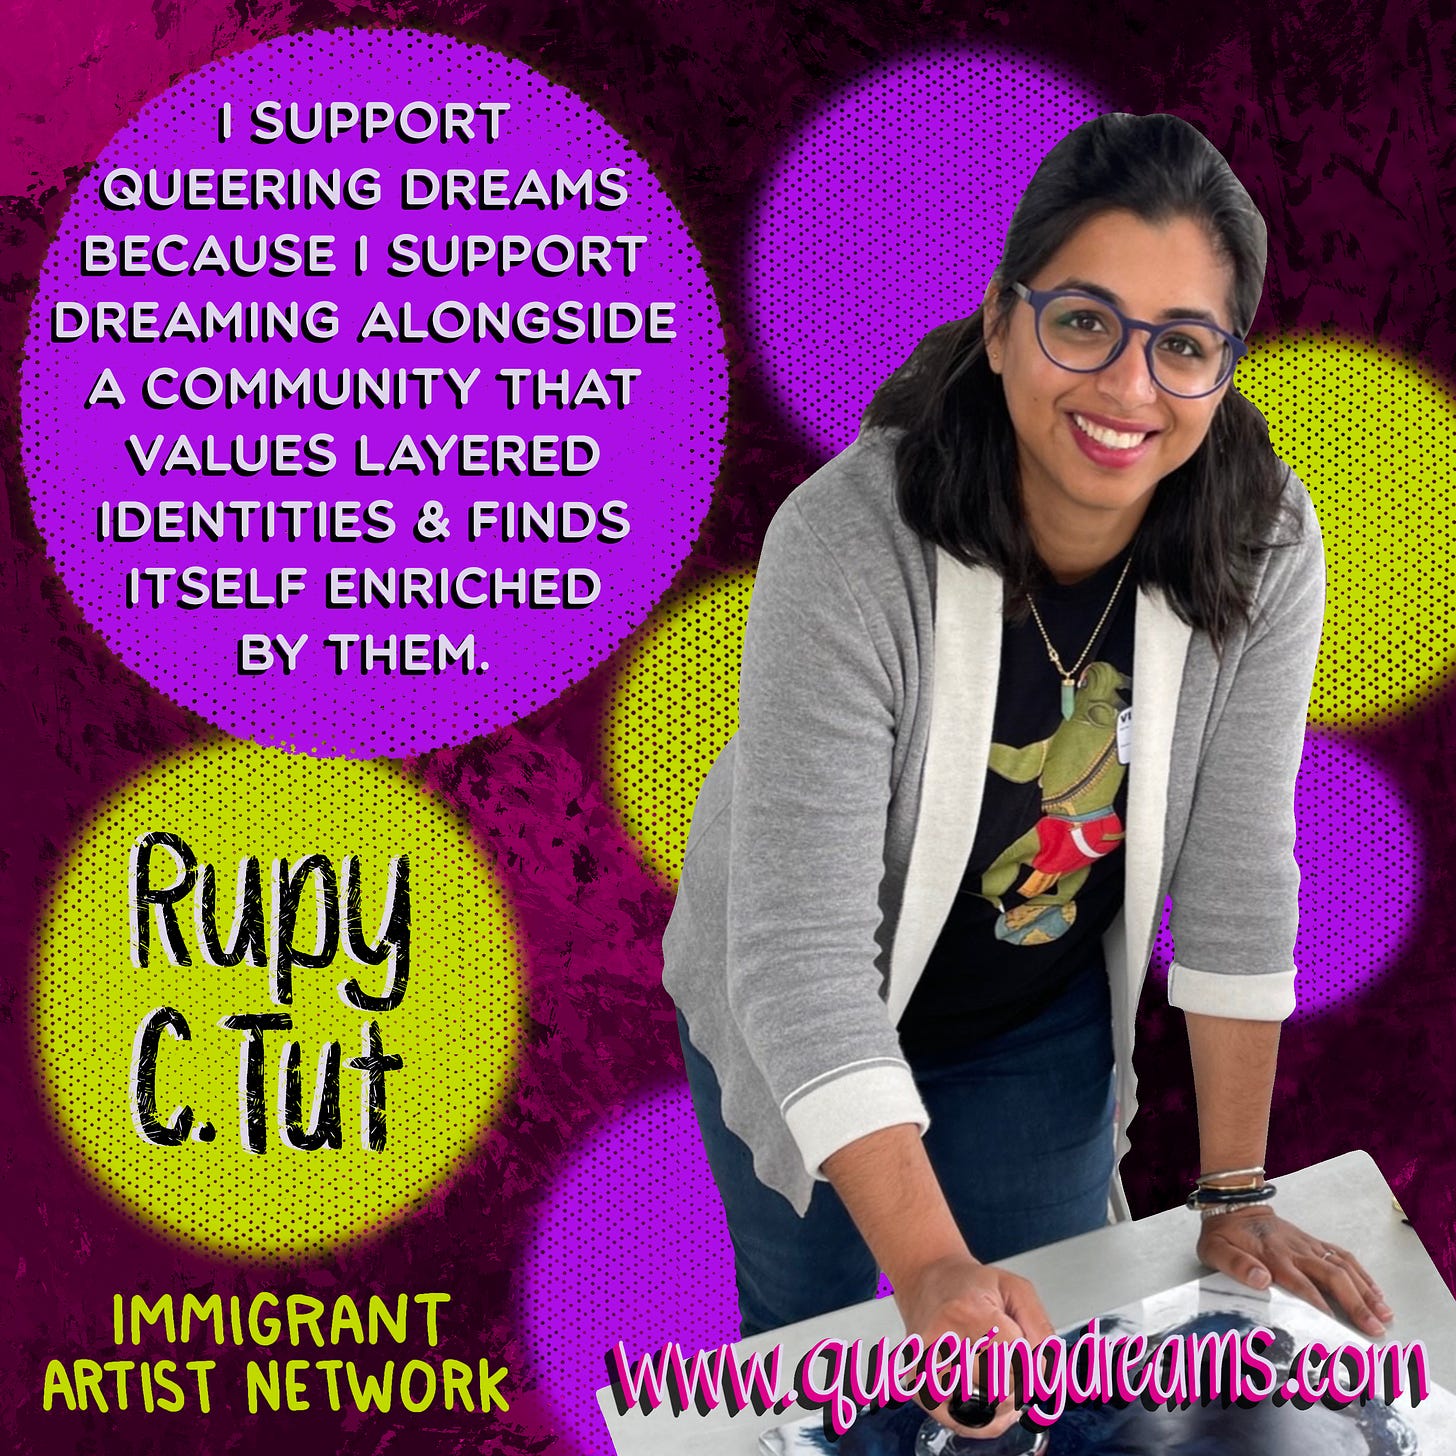 “I support Queering Dreams because I support dreaming alongside a community that values layered identities & finds itself enriched by them,” in white typeface against a purple dot. “Rupy C. Tut,” in black hand lettering set against a yellow dot. Rupy is a first generation Punjabi Sikh immigrant artist, is smiling & looking into the camera, and is wearing the Demon tee. www.queeringdreams.com. All set against a pink with black splotchy paint background.